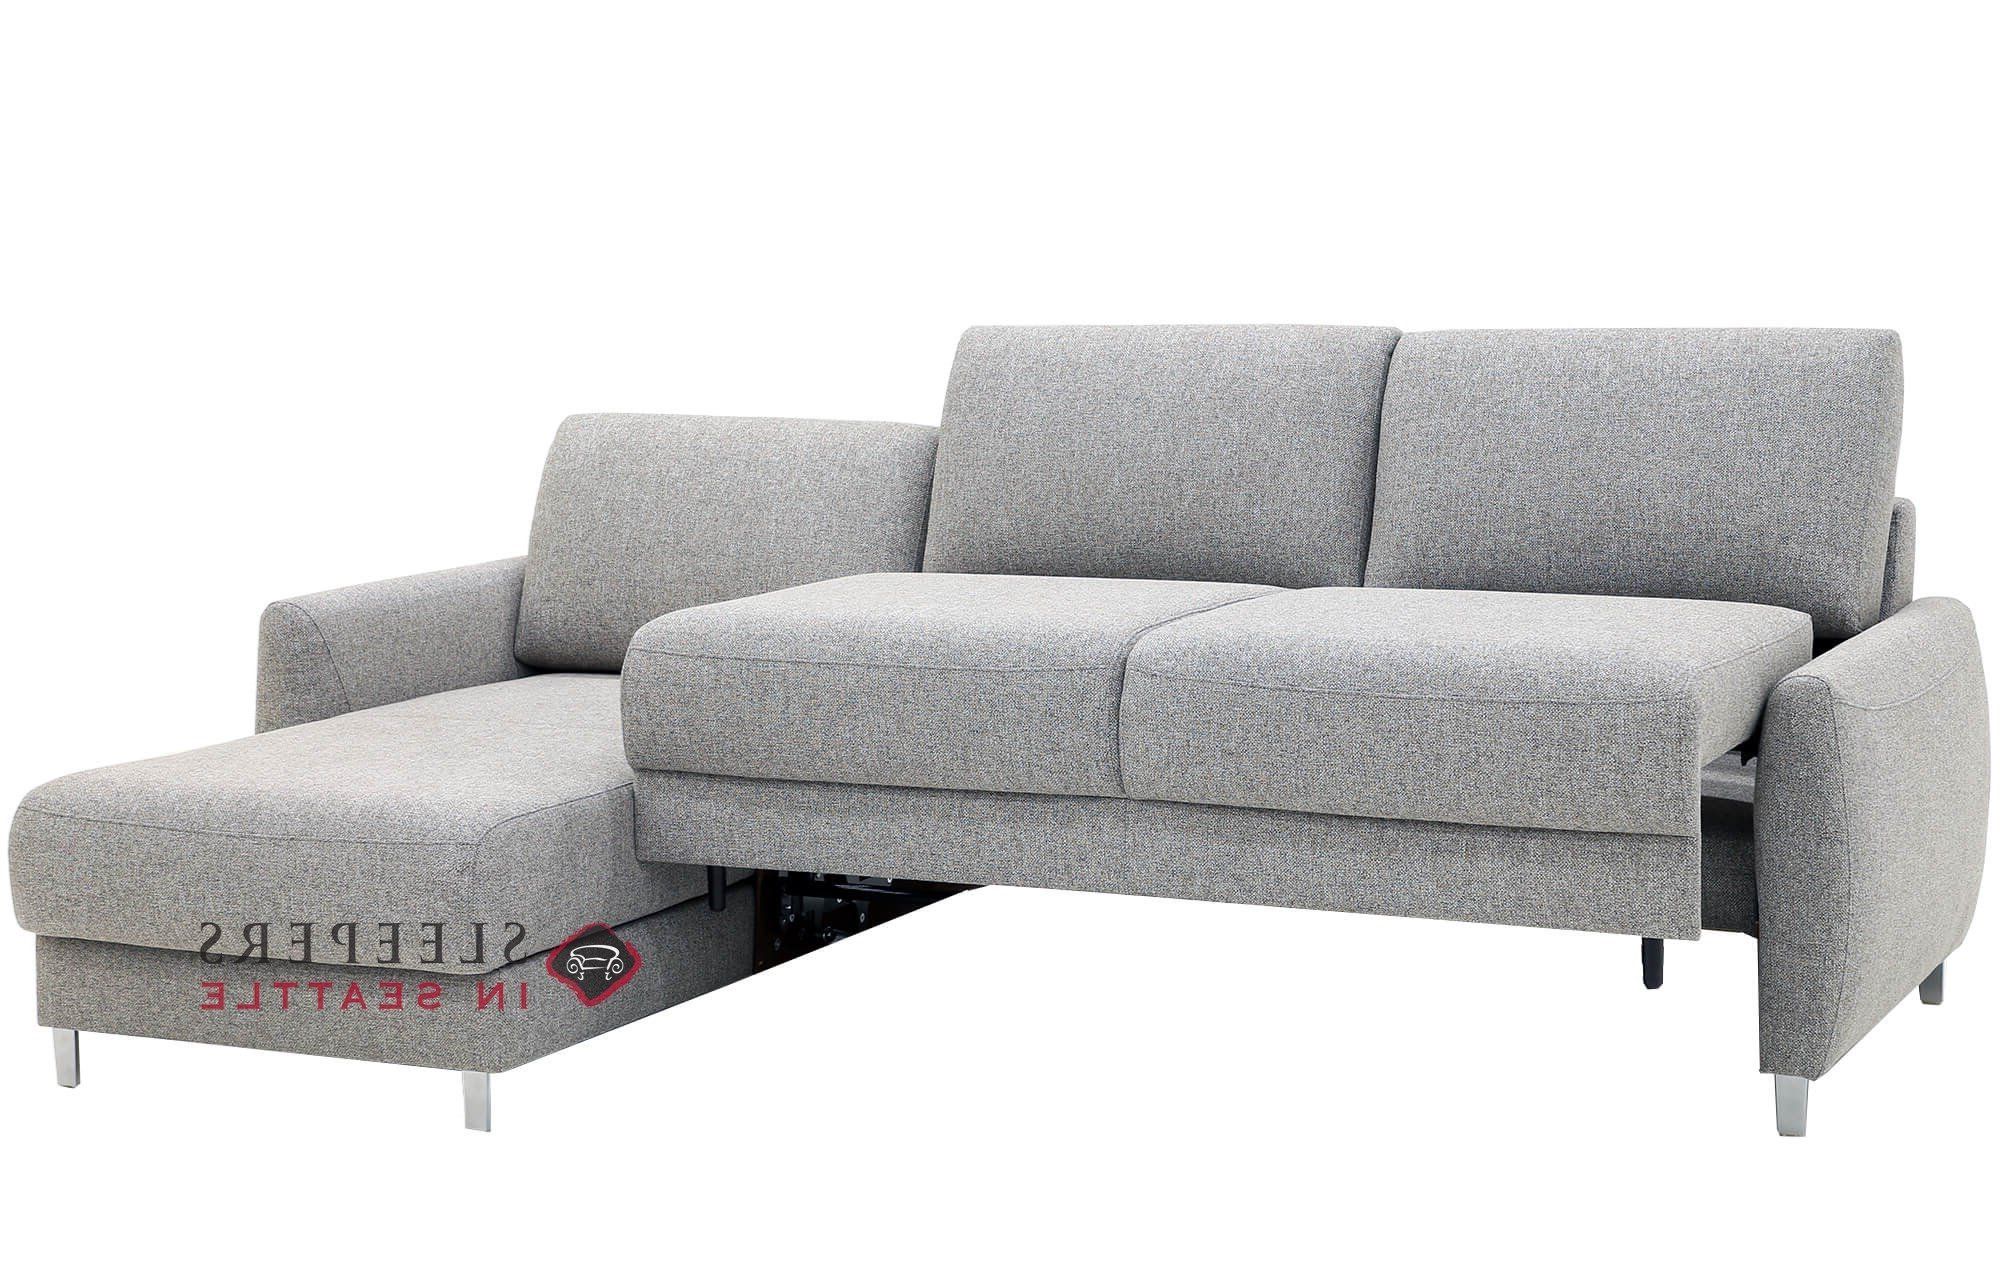 Customize And Personalize Delta Chaise Sectional Fabric Sofaluonto |  Chaise Sectional Size Sofa Bed | Sleepersinseattle Regarding Convertible Sofa With Matching Chaise (View 4 of 20)